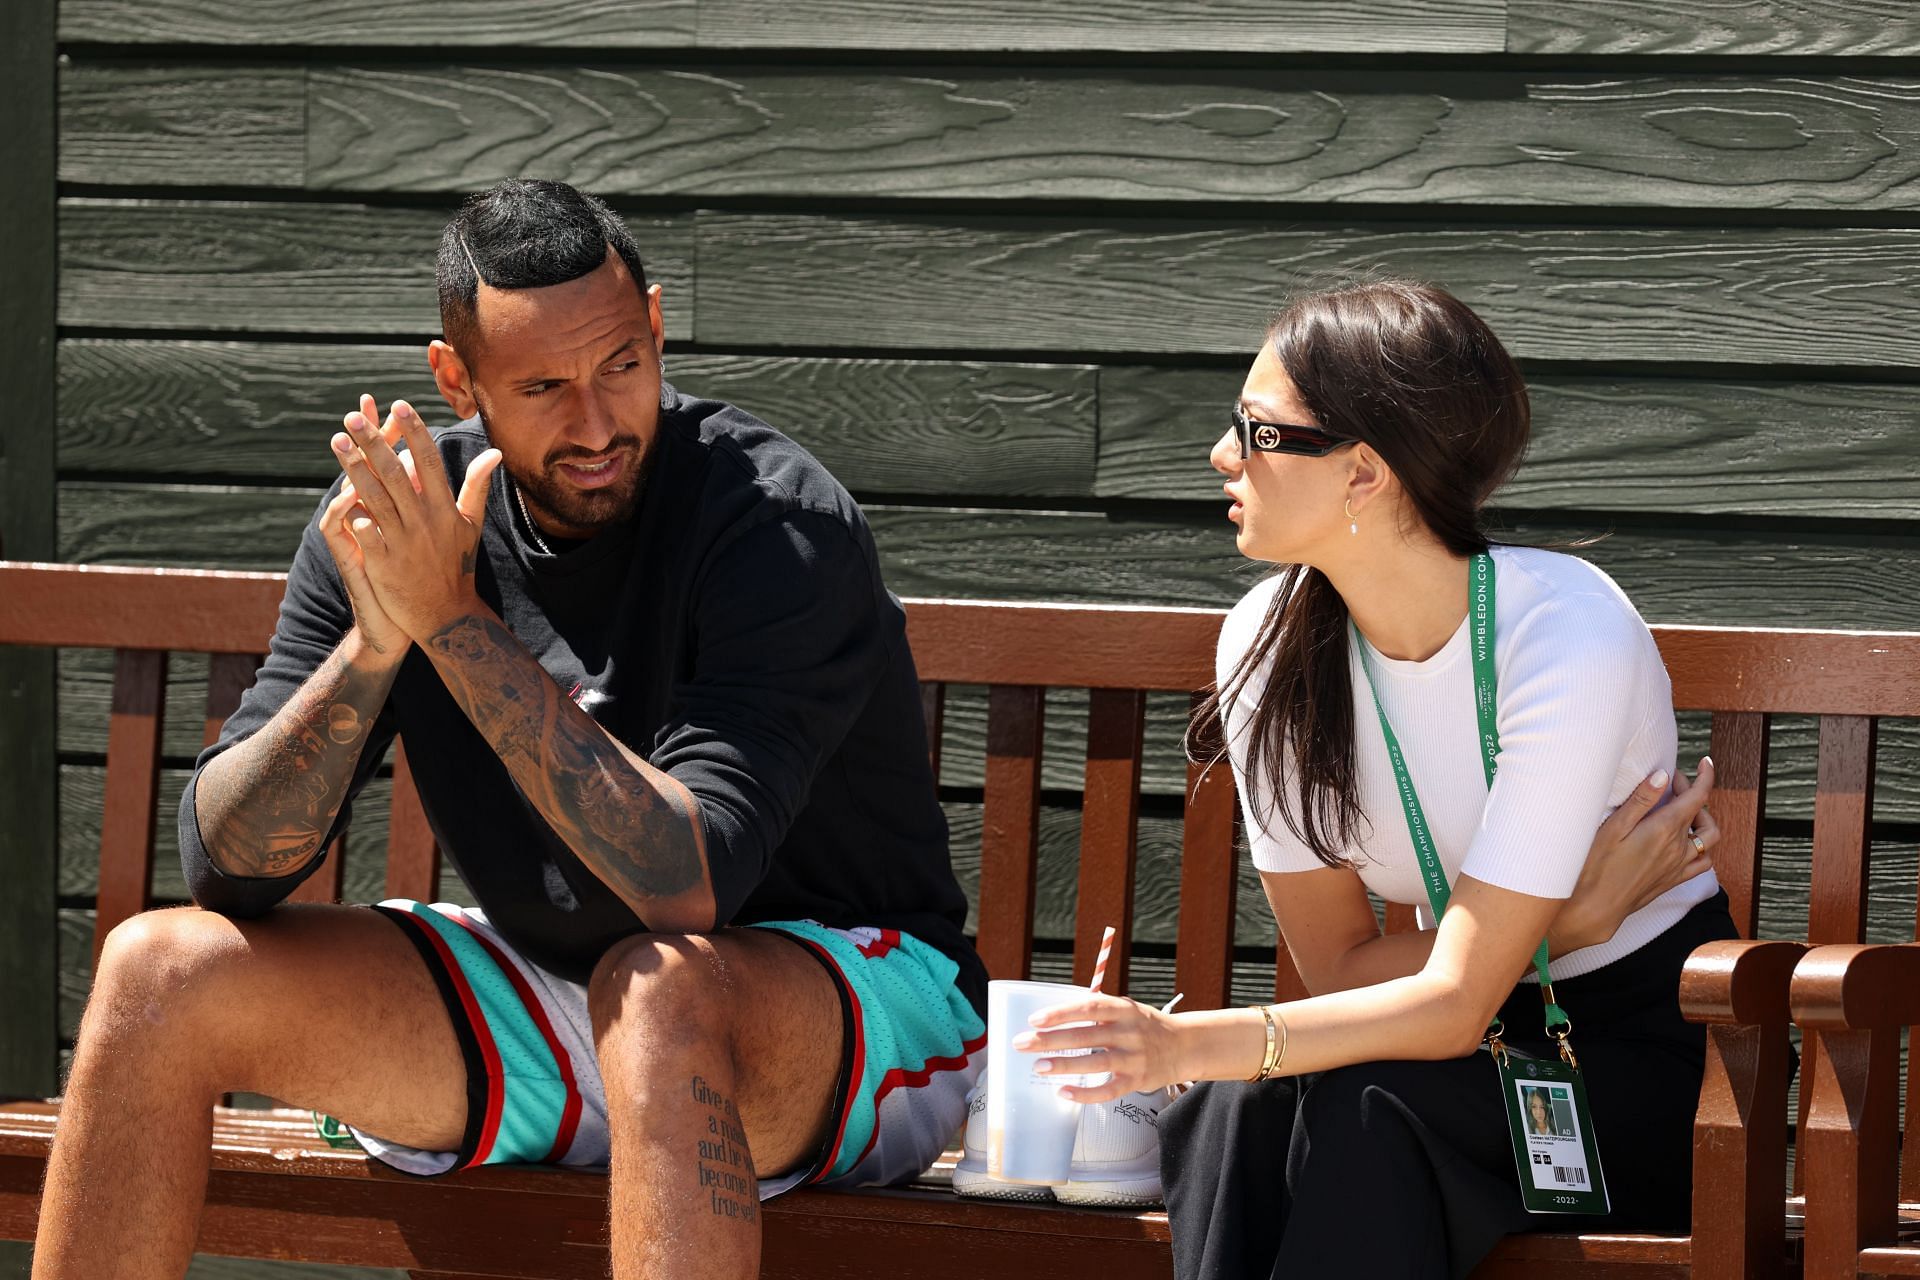 Nick Kyrgios and his girlfriend Costeen Hatzi at The Championships - Wimbledon 2022.